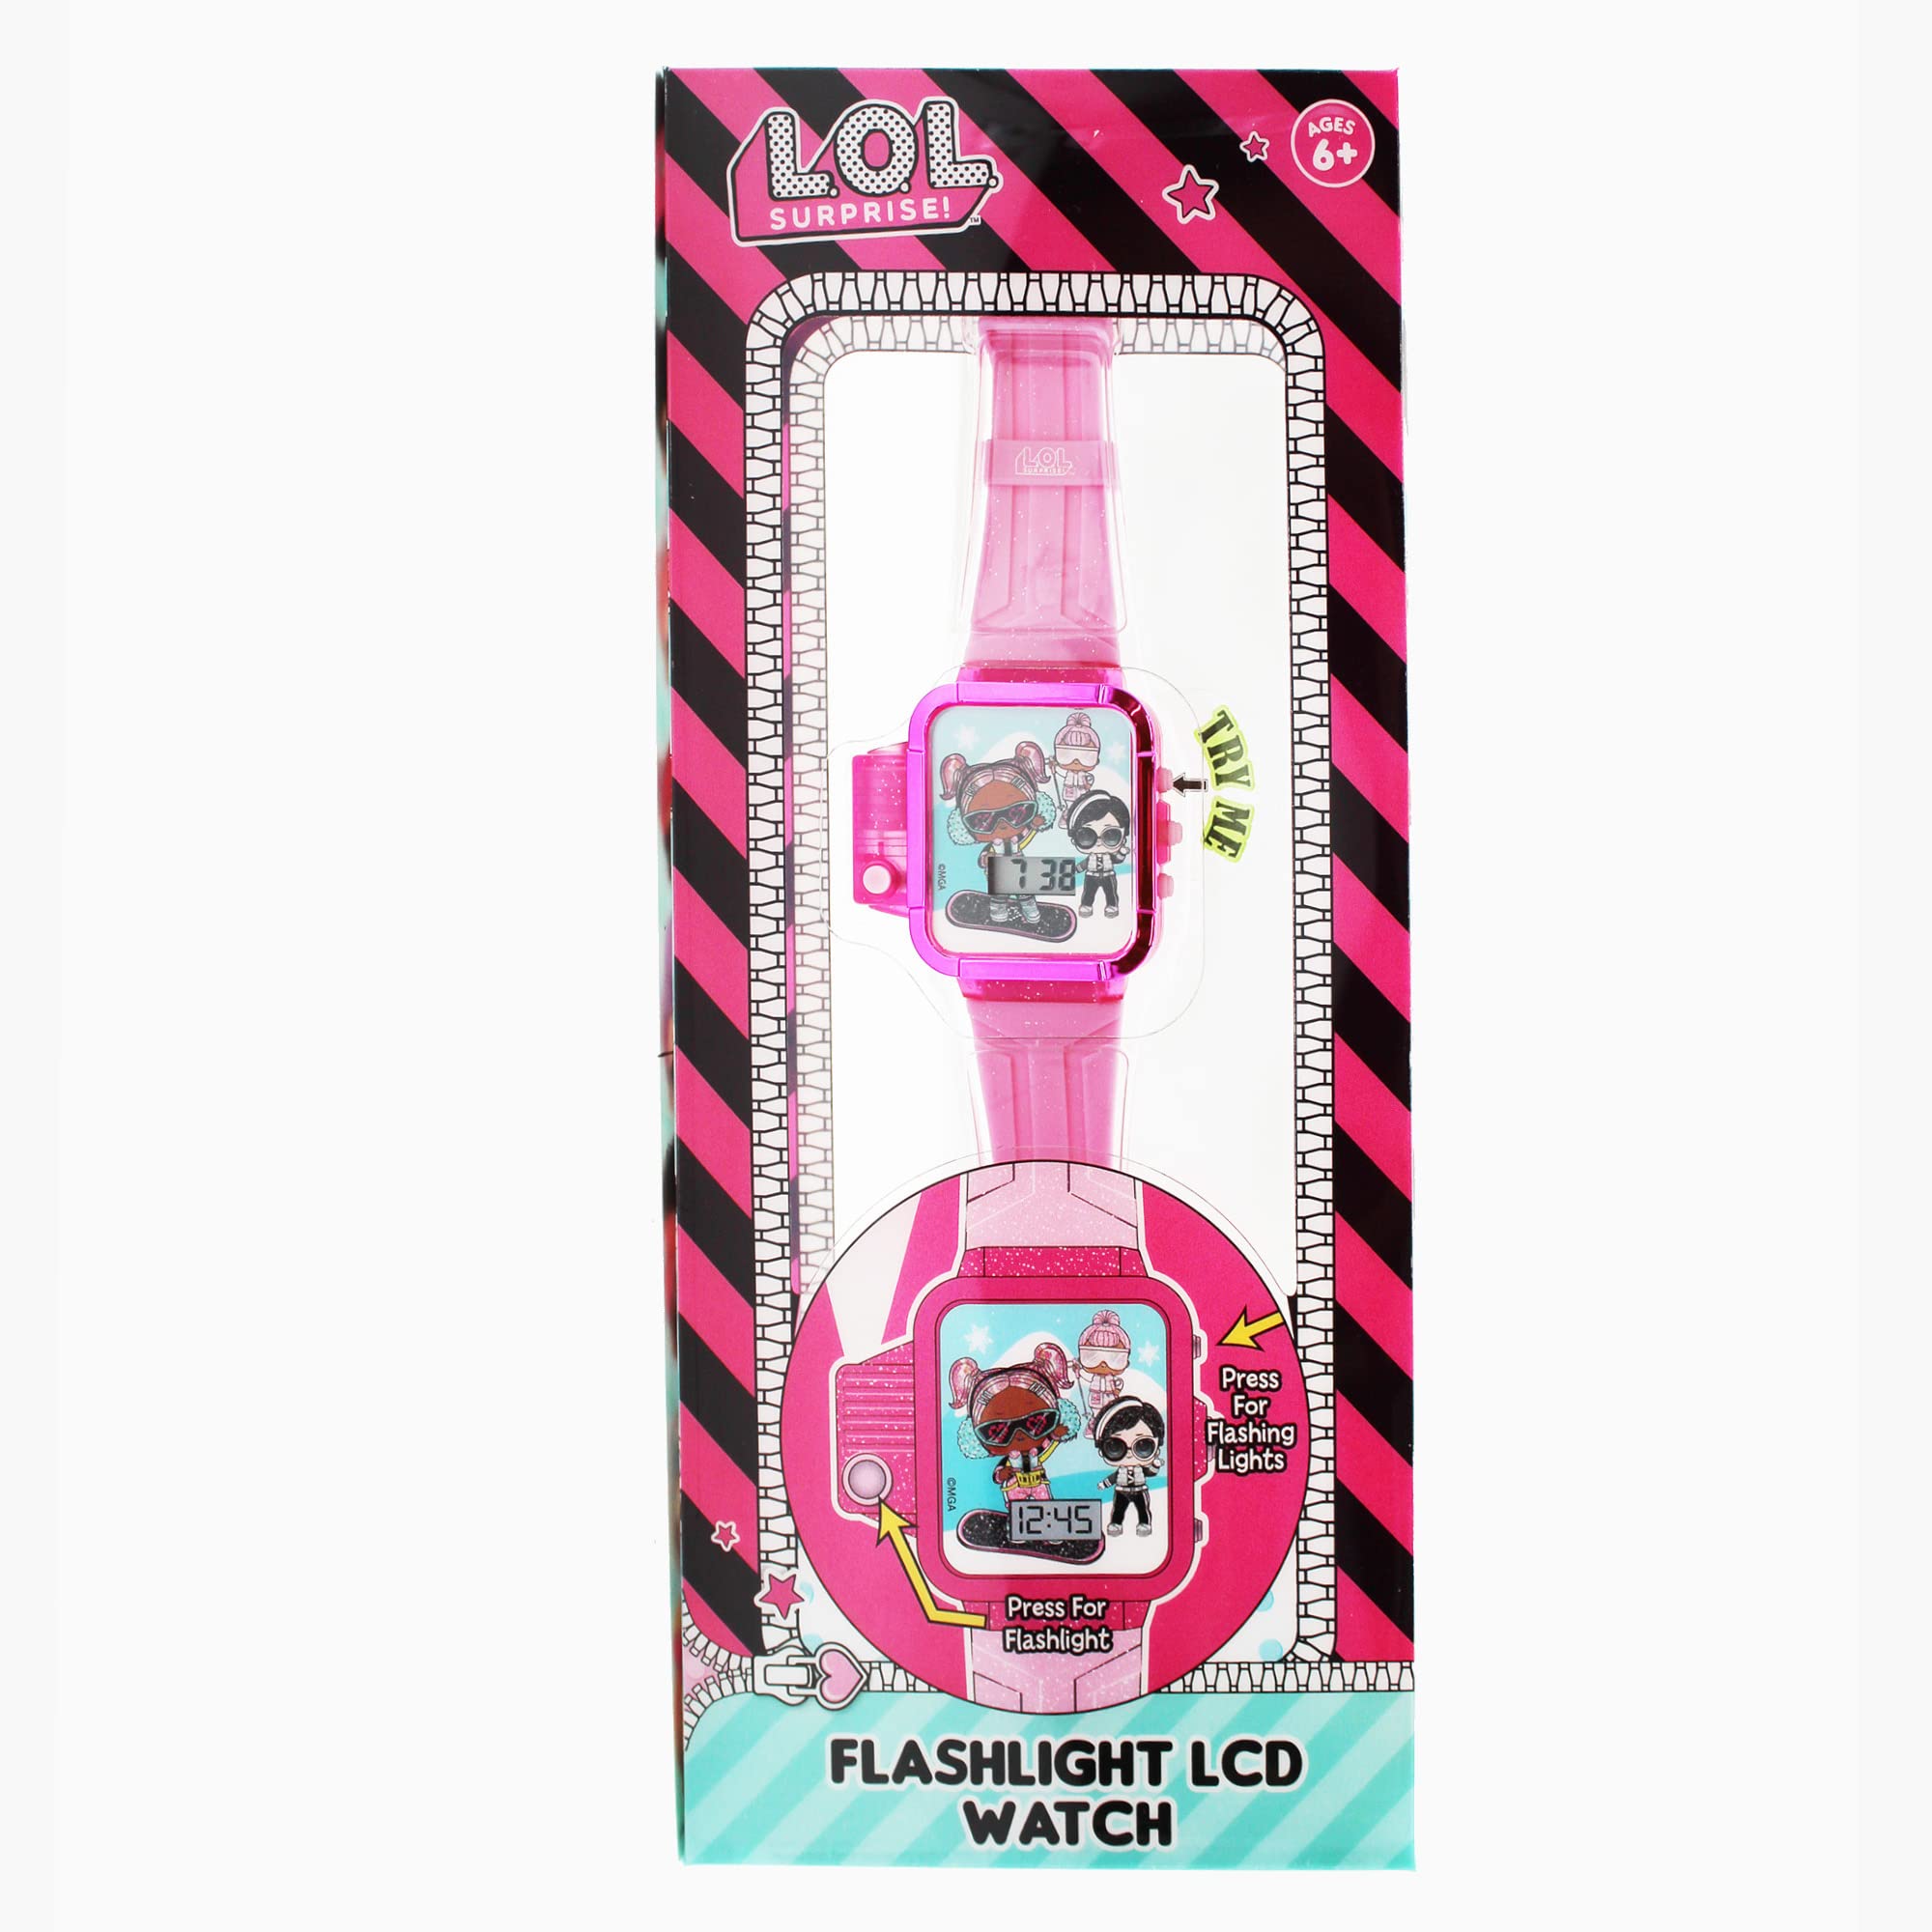 Accutime Kids MGA LOL Surprise Hot Pink Digital LCD Quartz Wrist Watch with Flashlight, Baby Pink Strap for Girls, Boys, Kids All Ages (Model: LOL4662AZ)